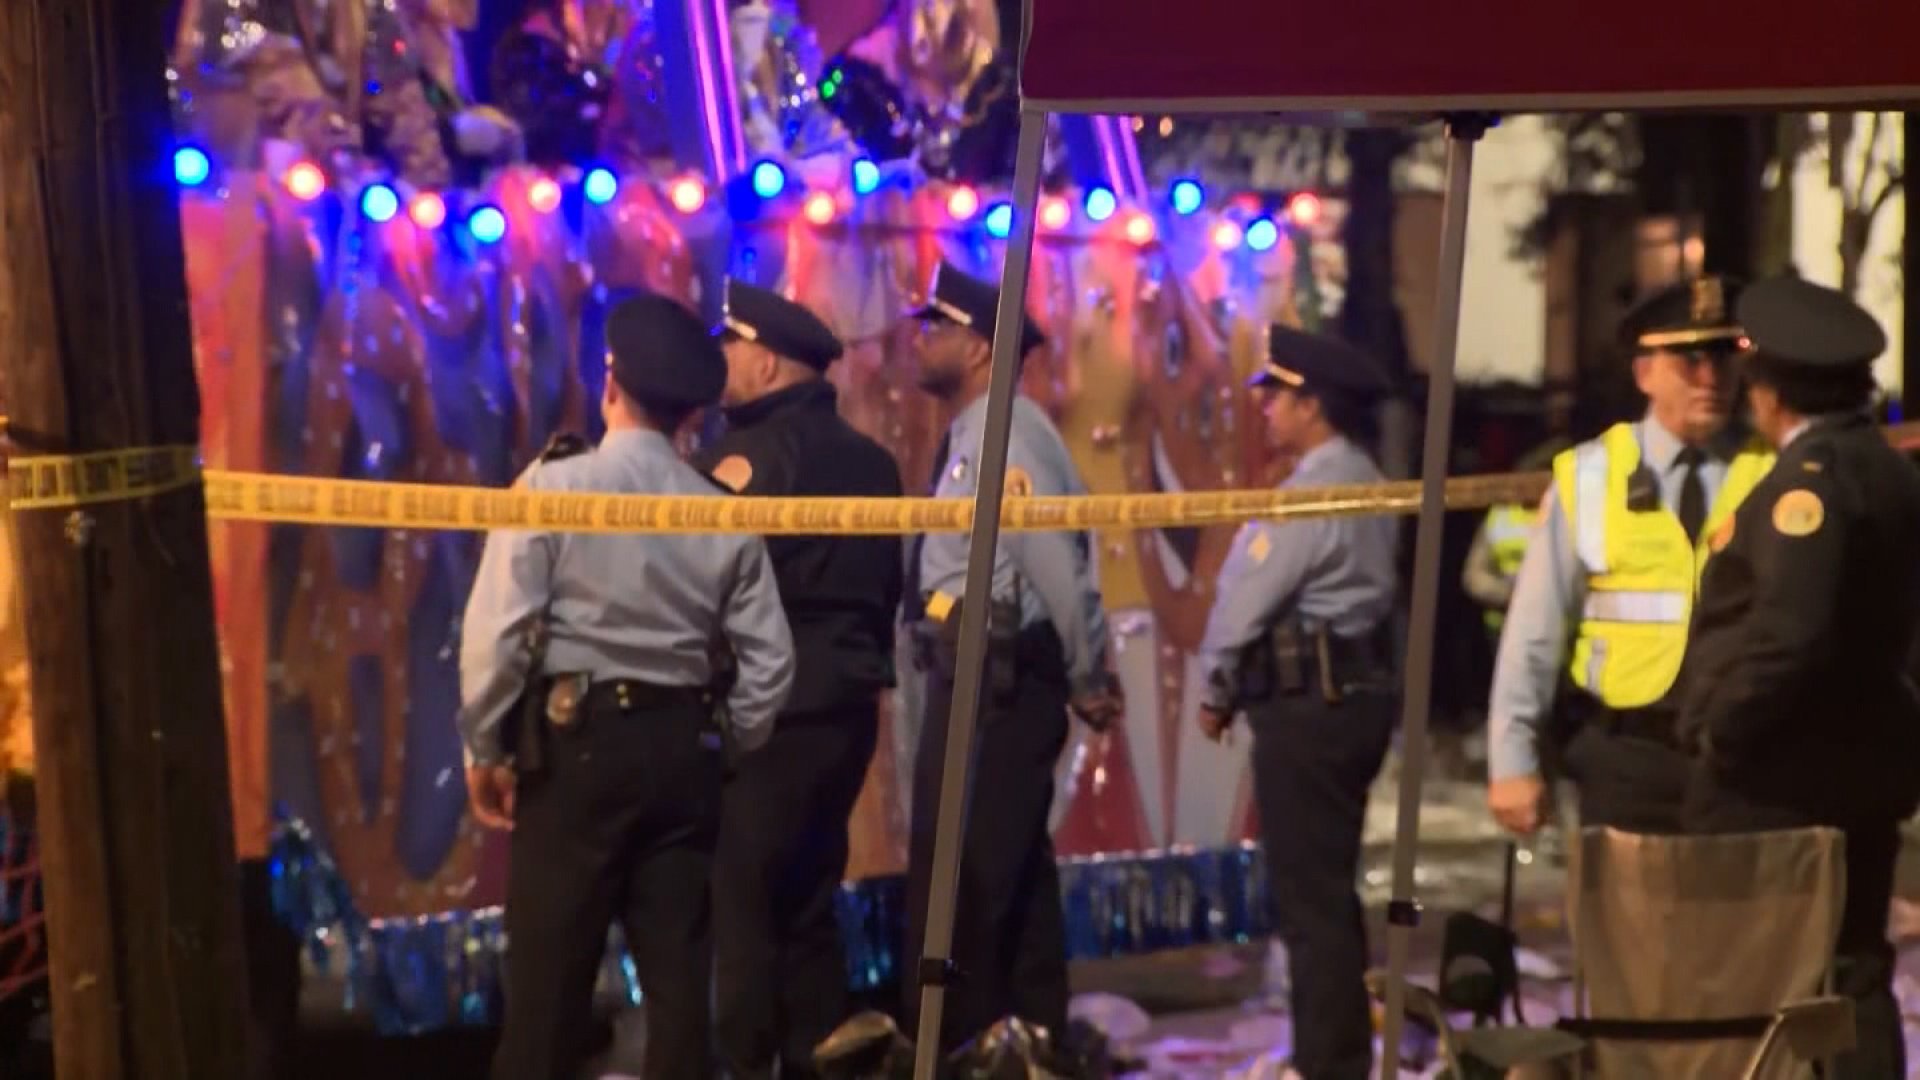 Police said five people were shot along a Mardi Gras parade route in New Orleans. A suspect is in c...